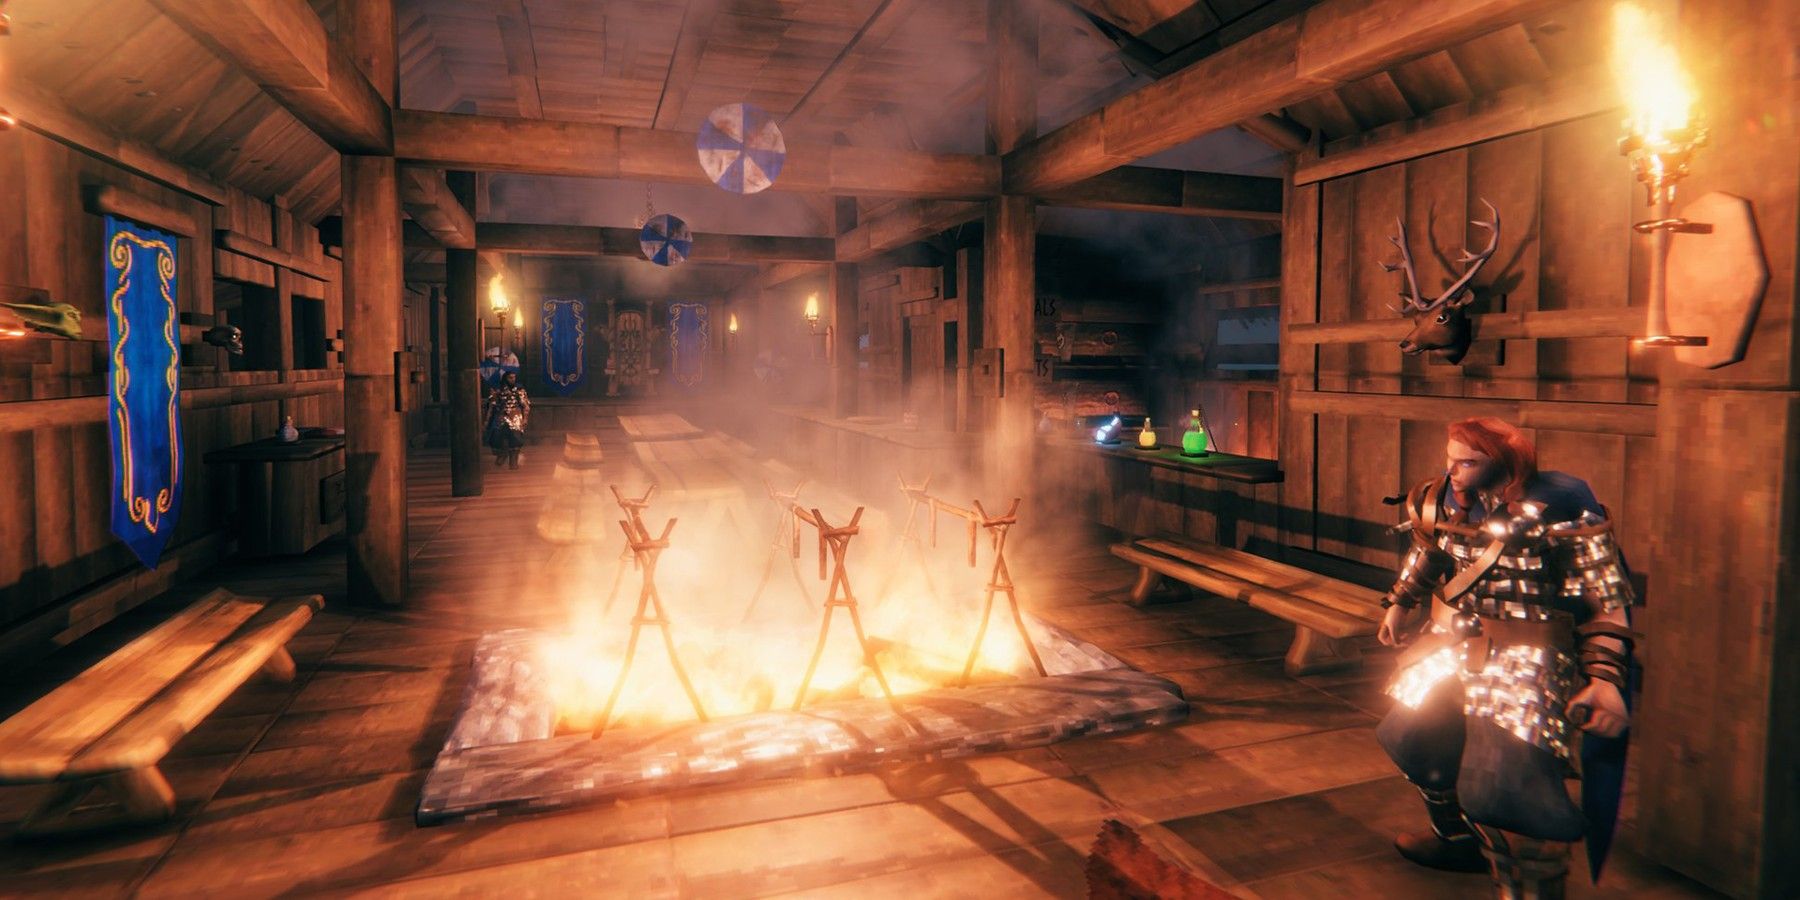 interior of a valheim home with several fires burning